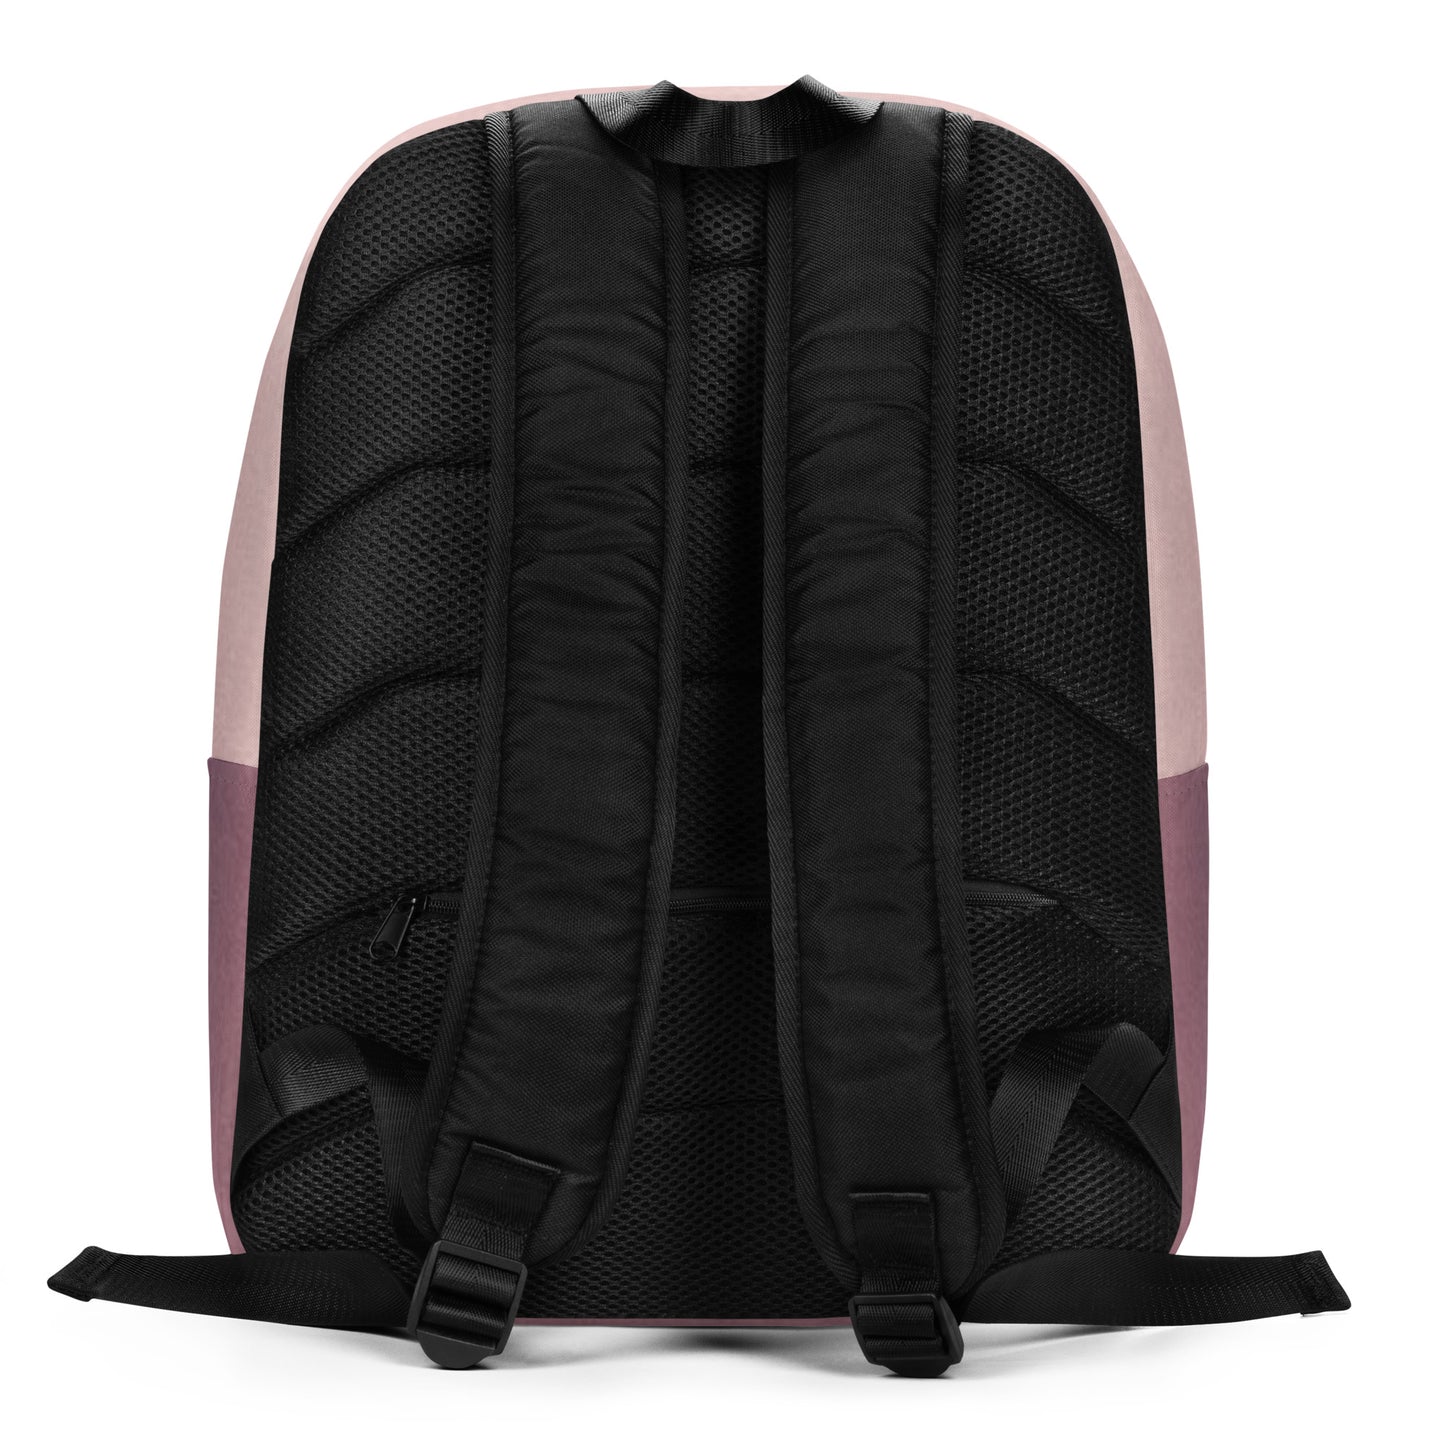 Humble Sportswear, unisex travel backpack waterproof, all-over print large capacity backpack